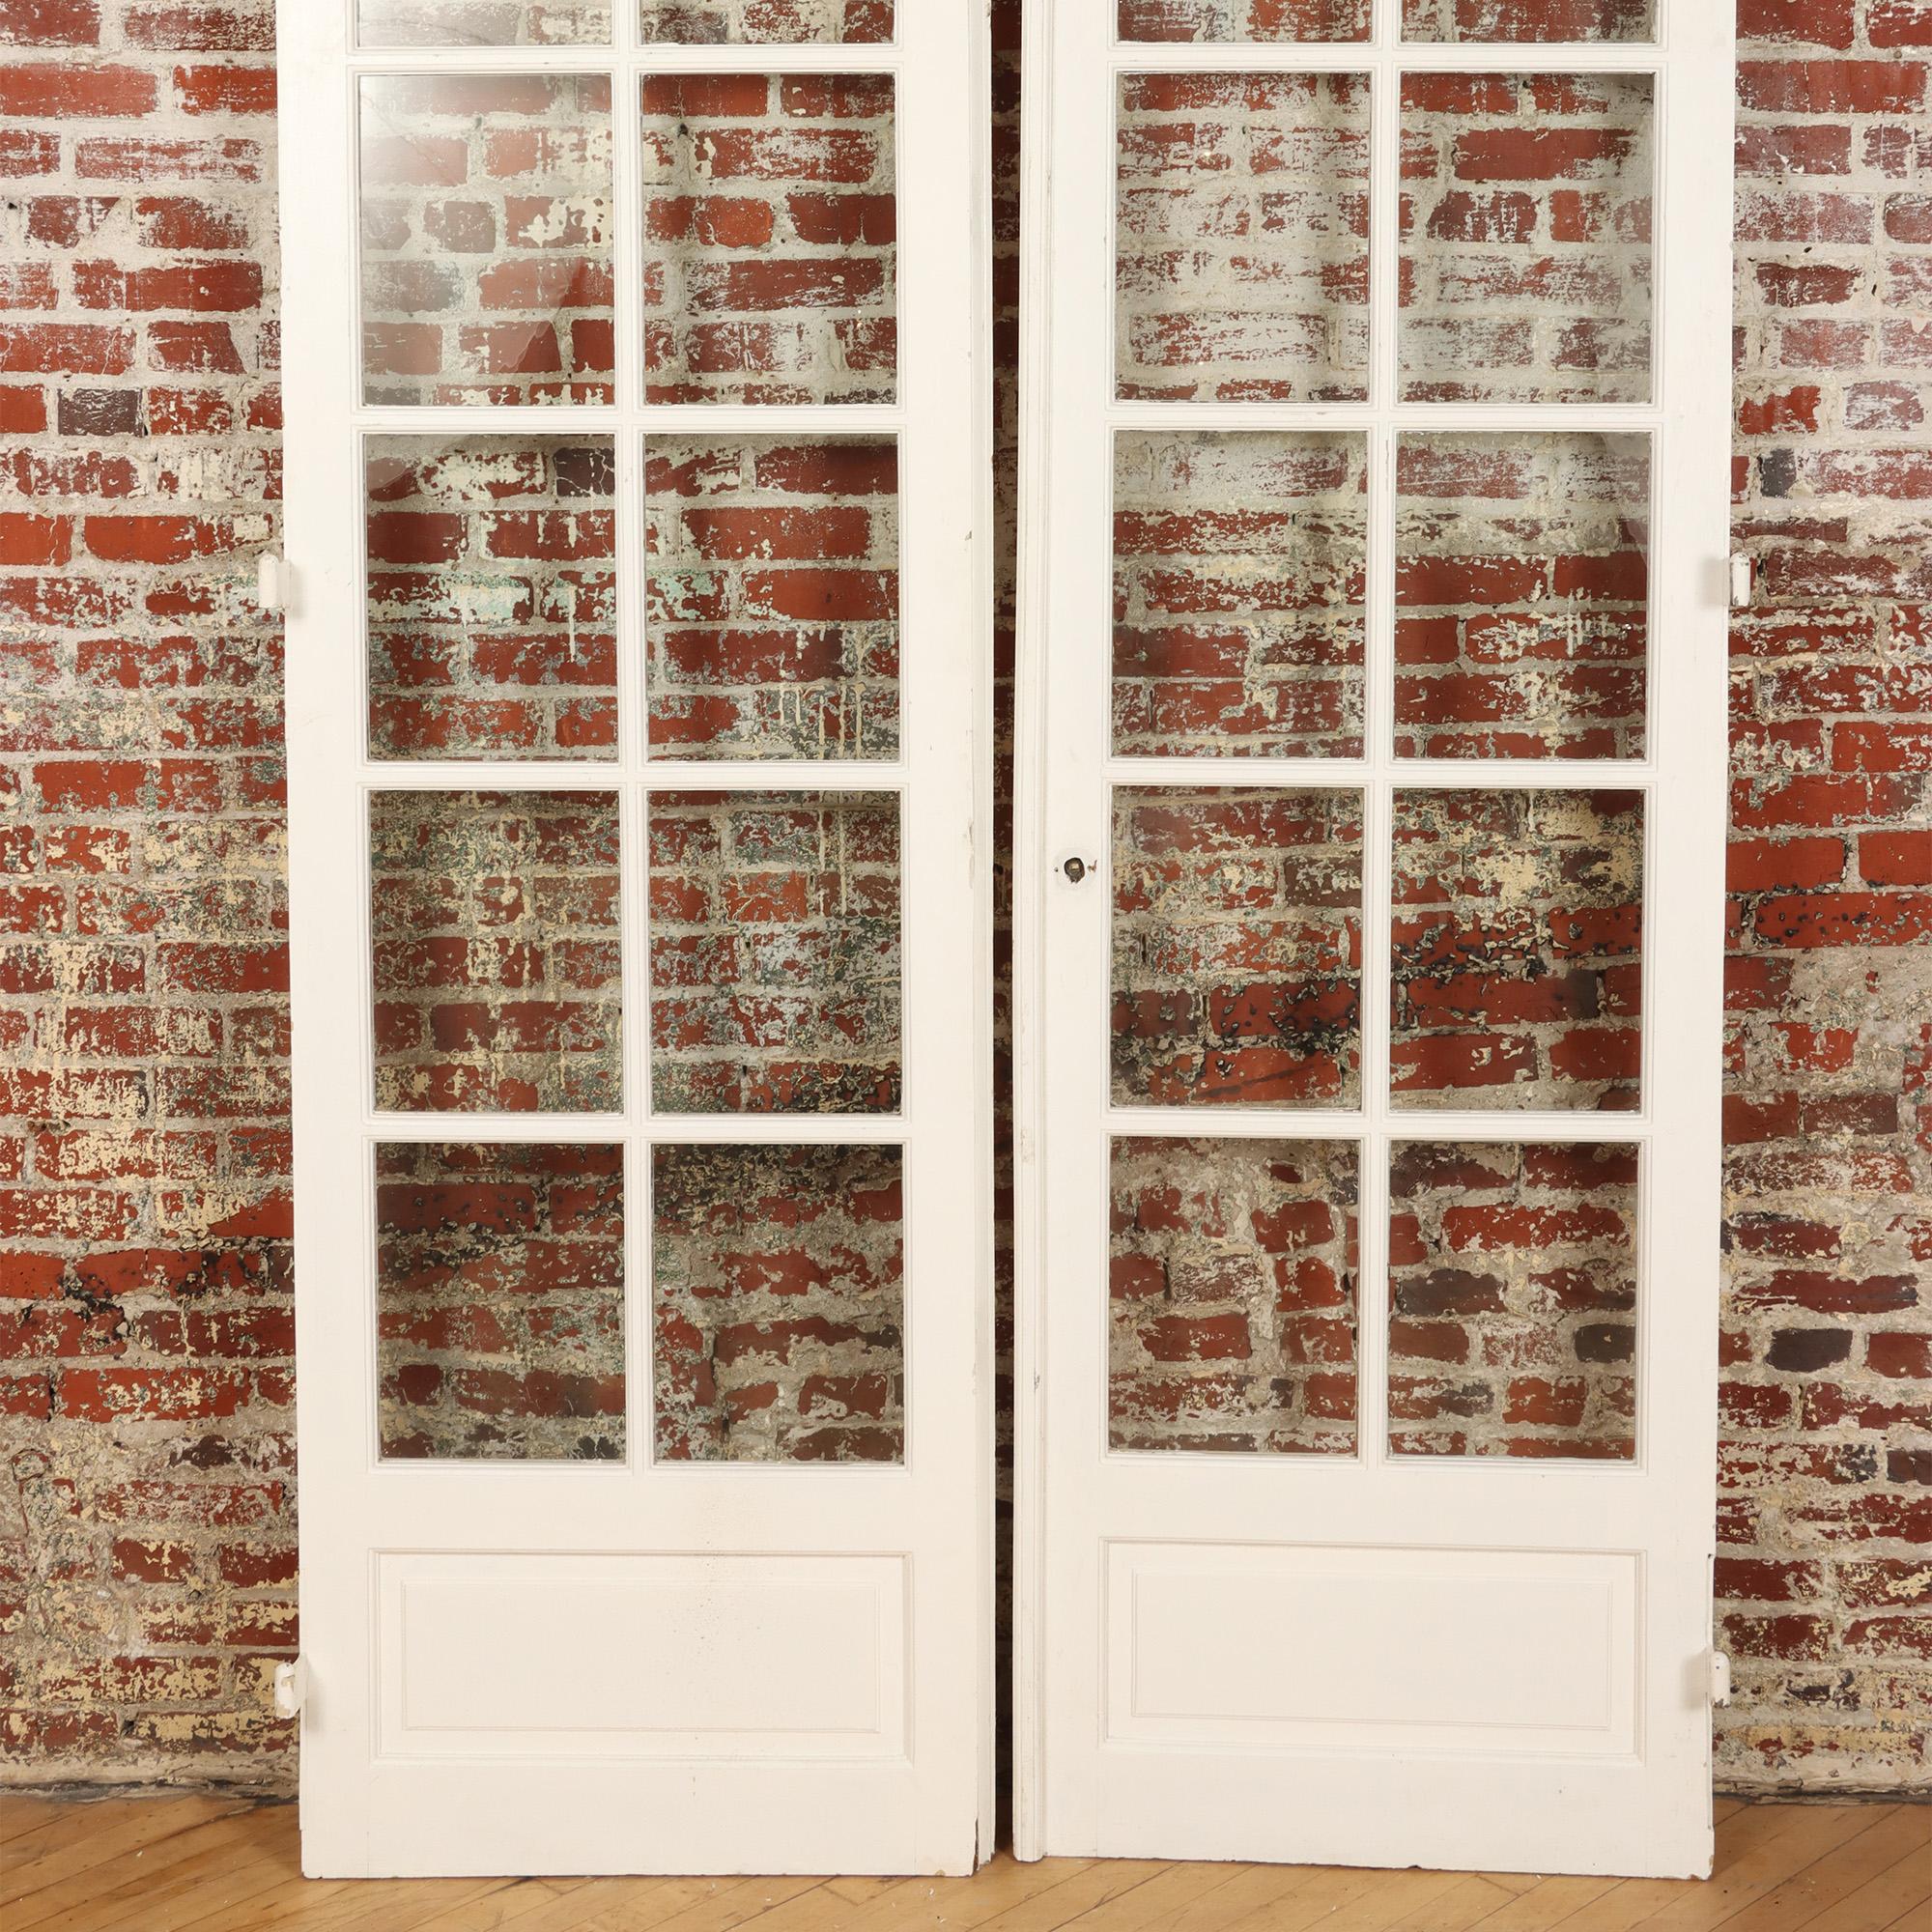 A pair of painted French doors C 1900. There are 12 panes of glass on each door.
Each door W: 28.75